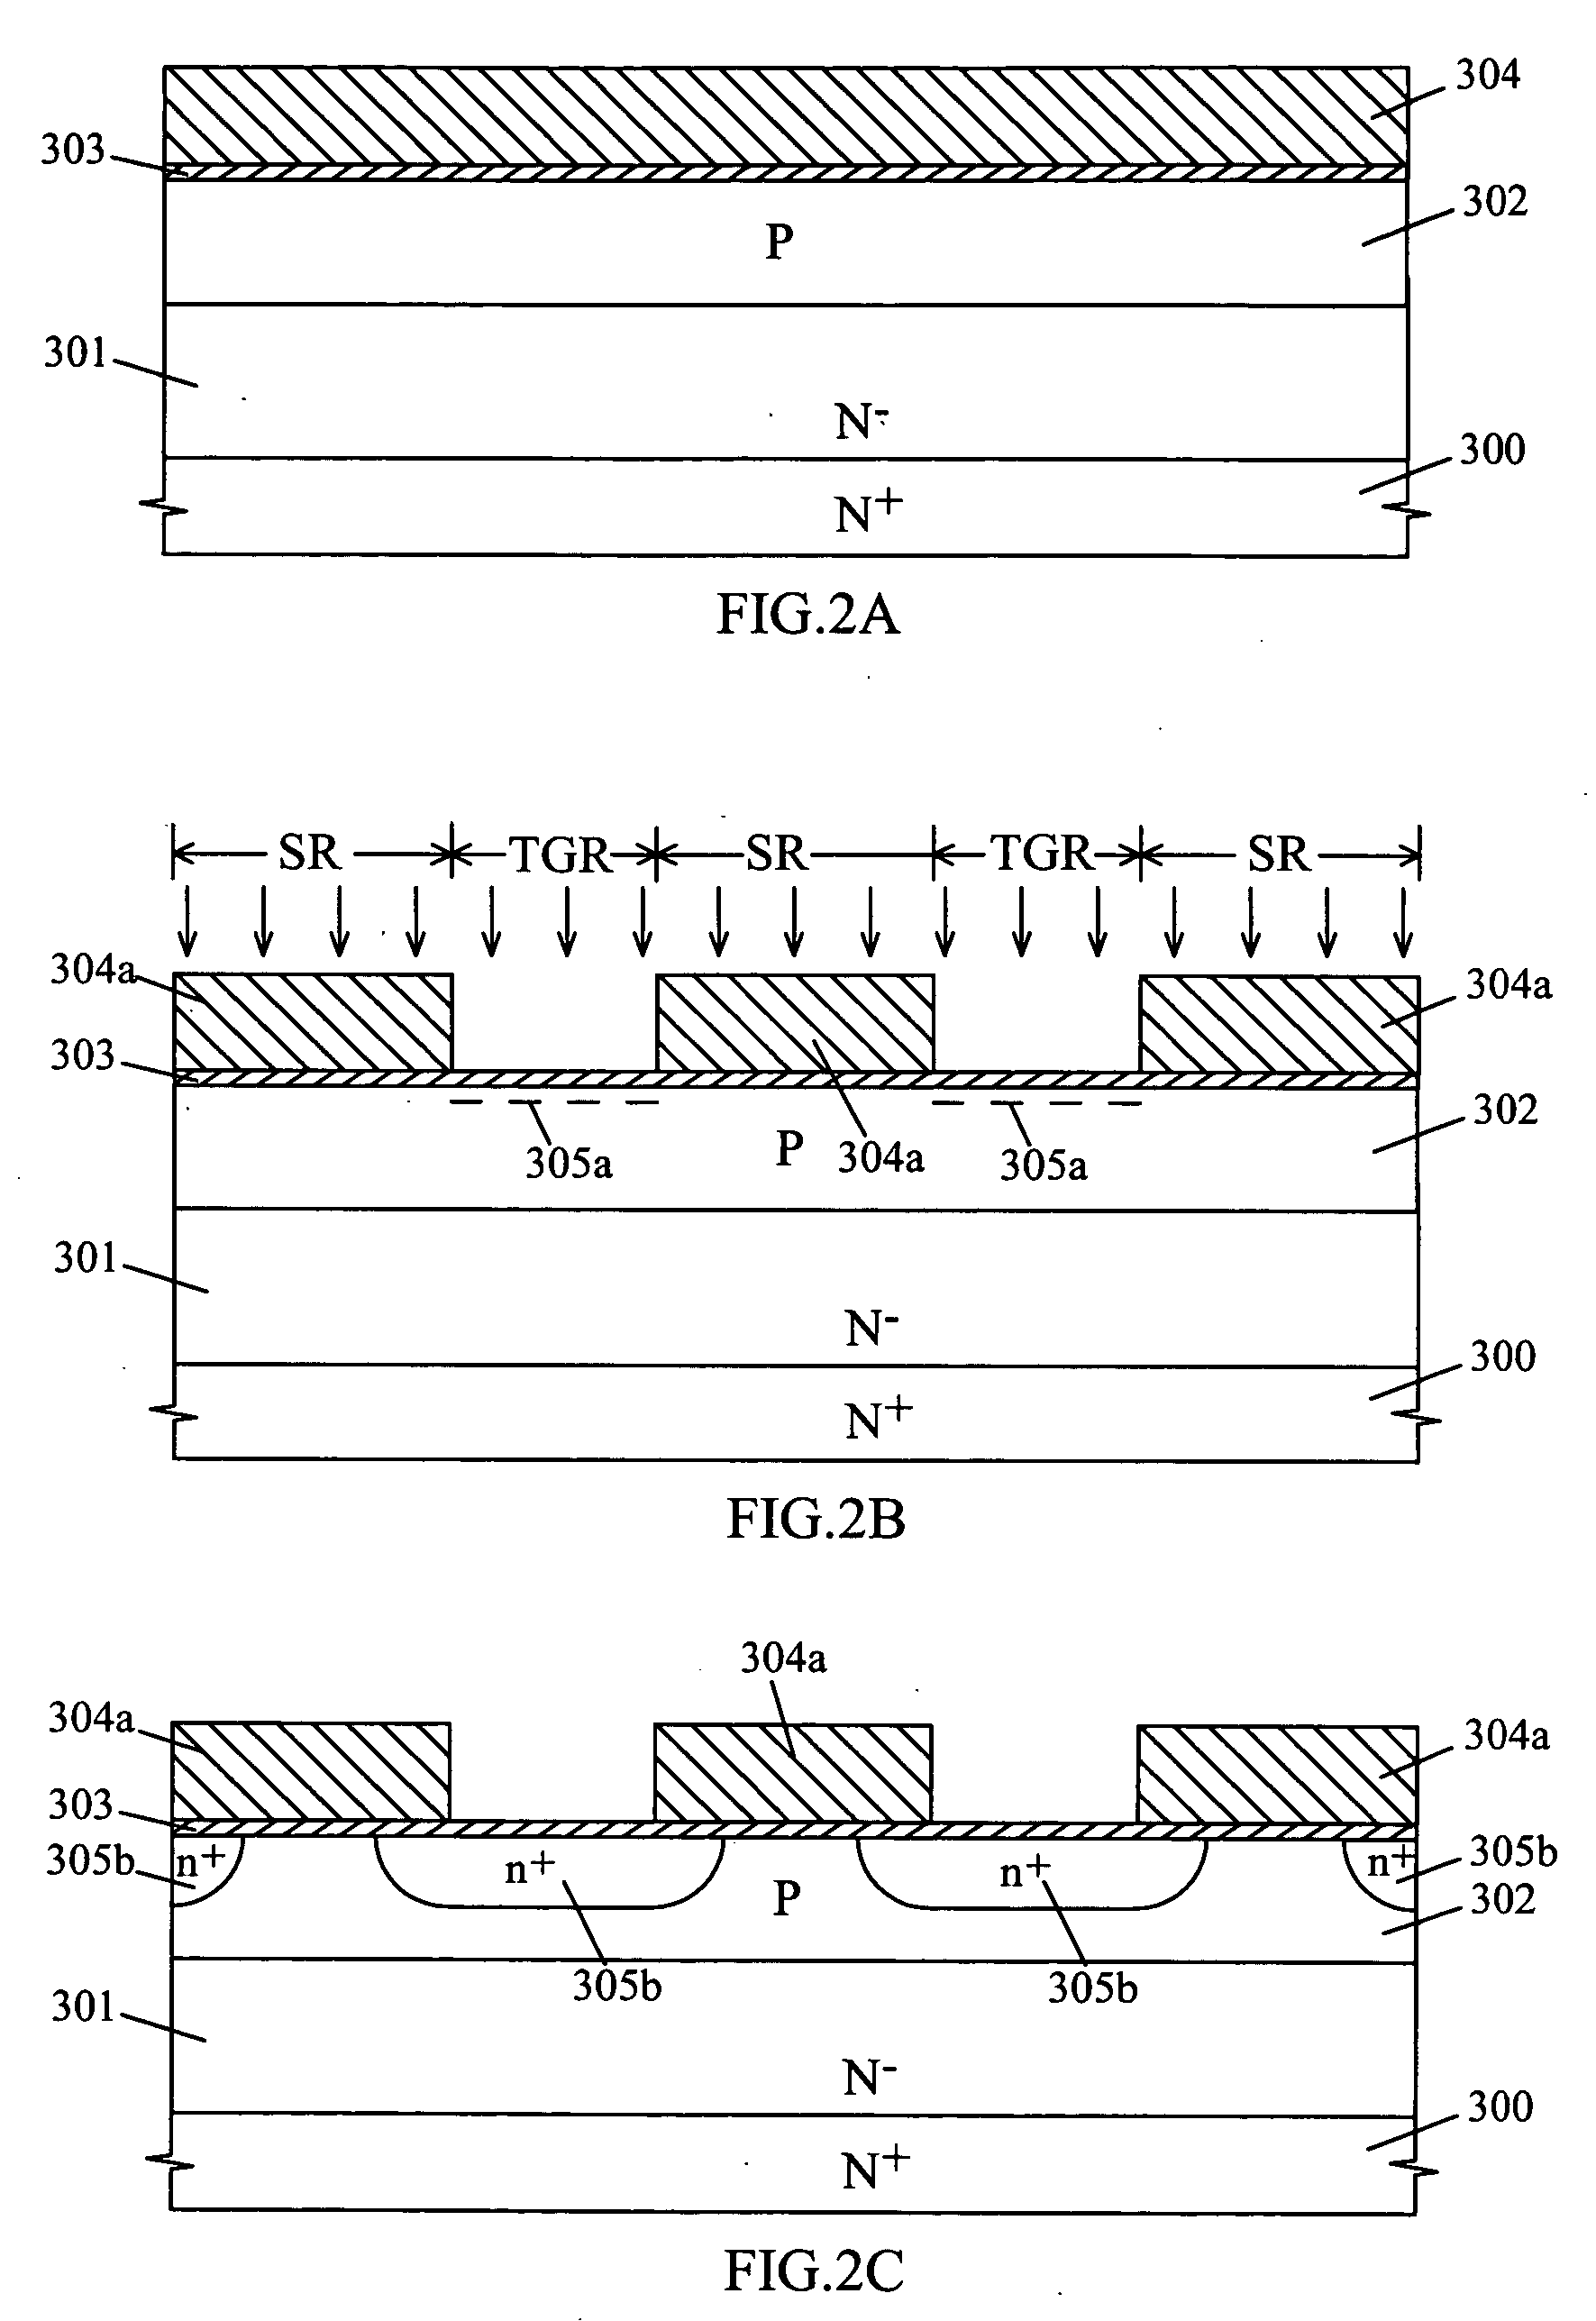 Self-aligned trench-type DMOS transistor structure and its manufacturing methods